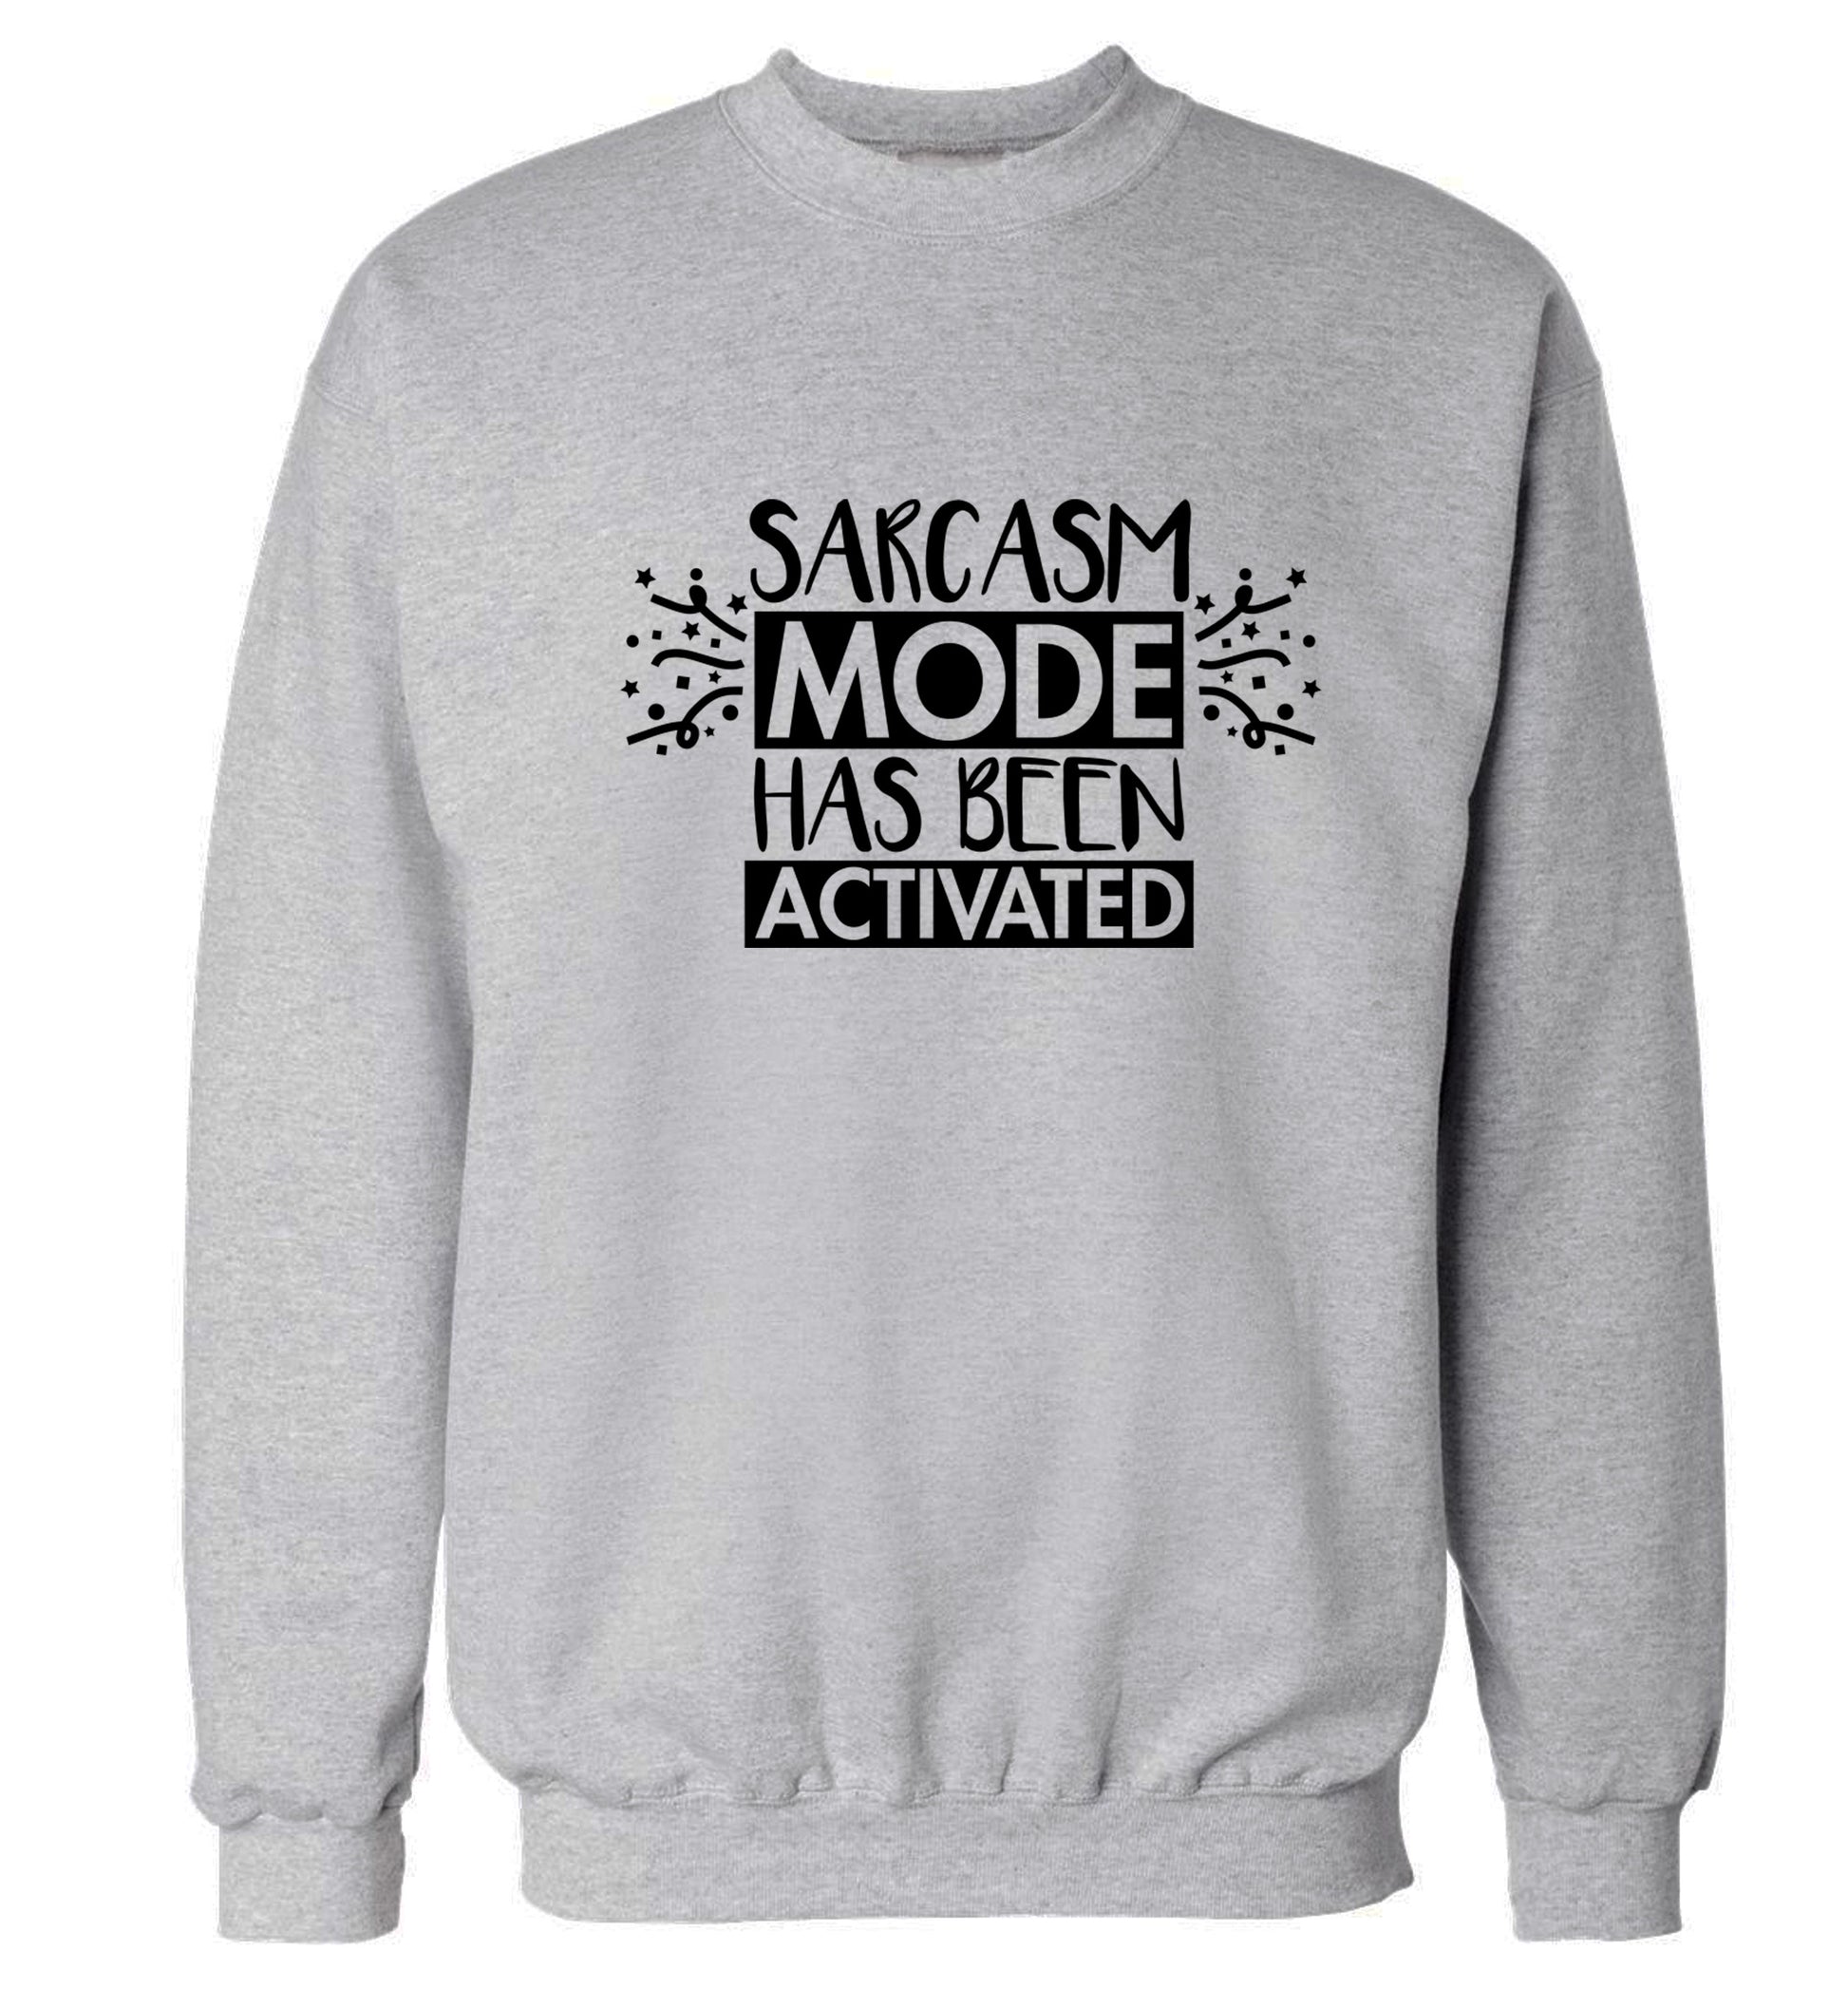 Sarcarsm mode has been activated Adult's unisex grey Sweater 2XL